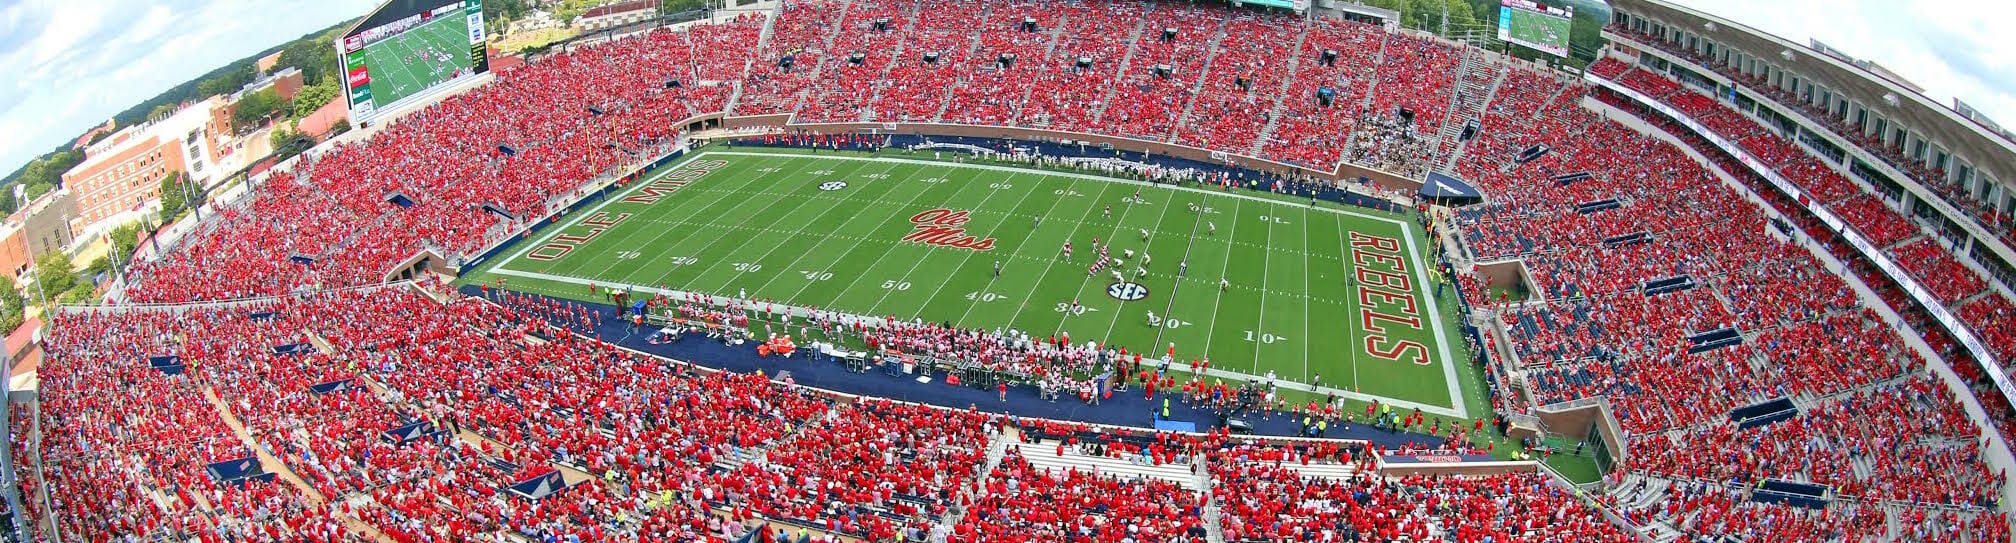 #19 Ole Miss Football vs Wofford in the home opener of the 2016 season in the new Vaught-Hemingway Stadium in Oxford, MS. Photo by Joshua McCoy/Ole Miss Athletics Twitter: @OleMissPix